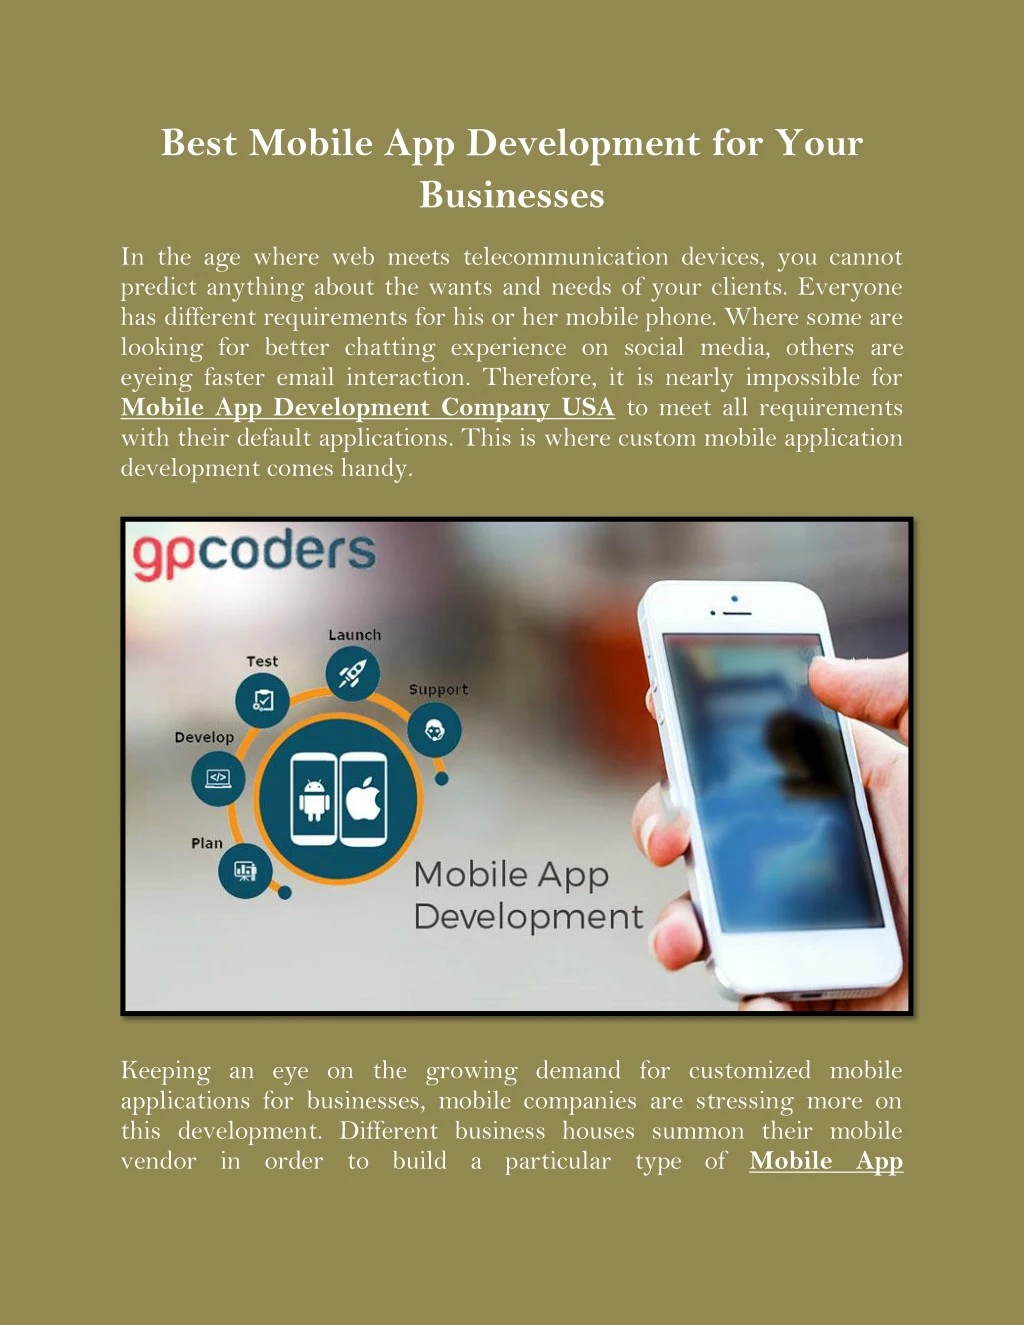 best mobile app development for your businesses